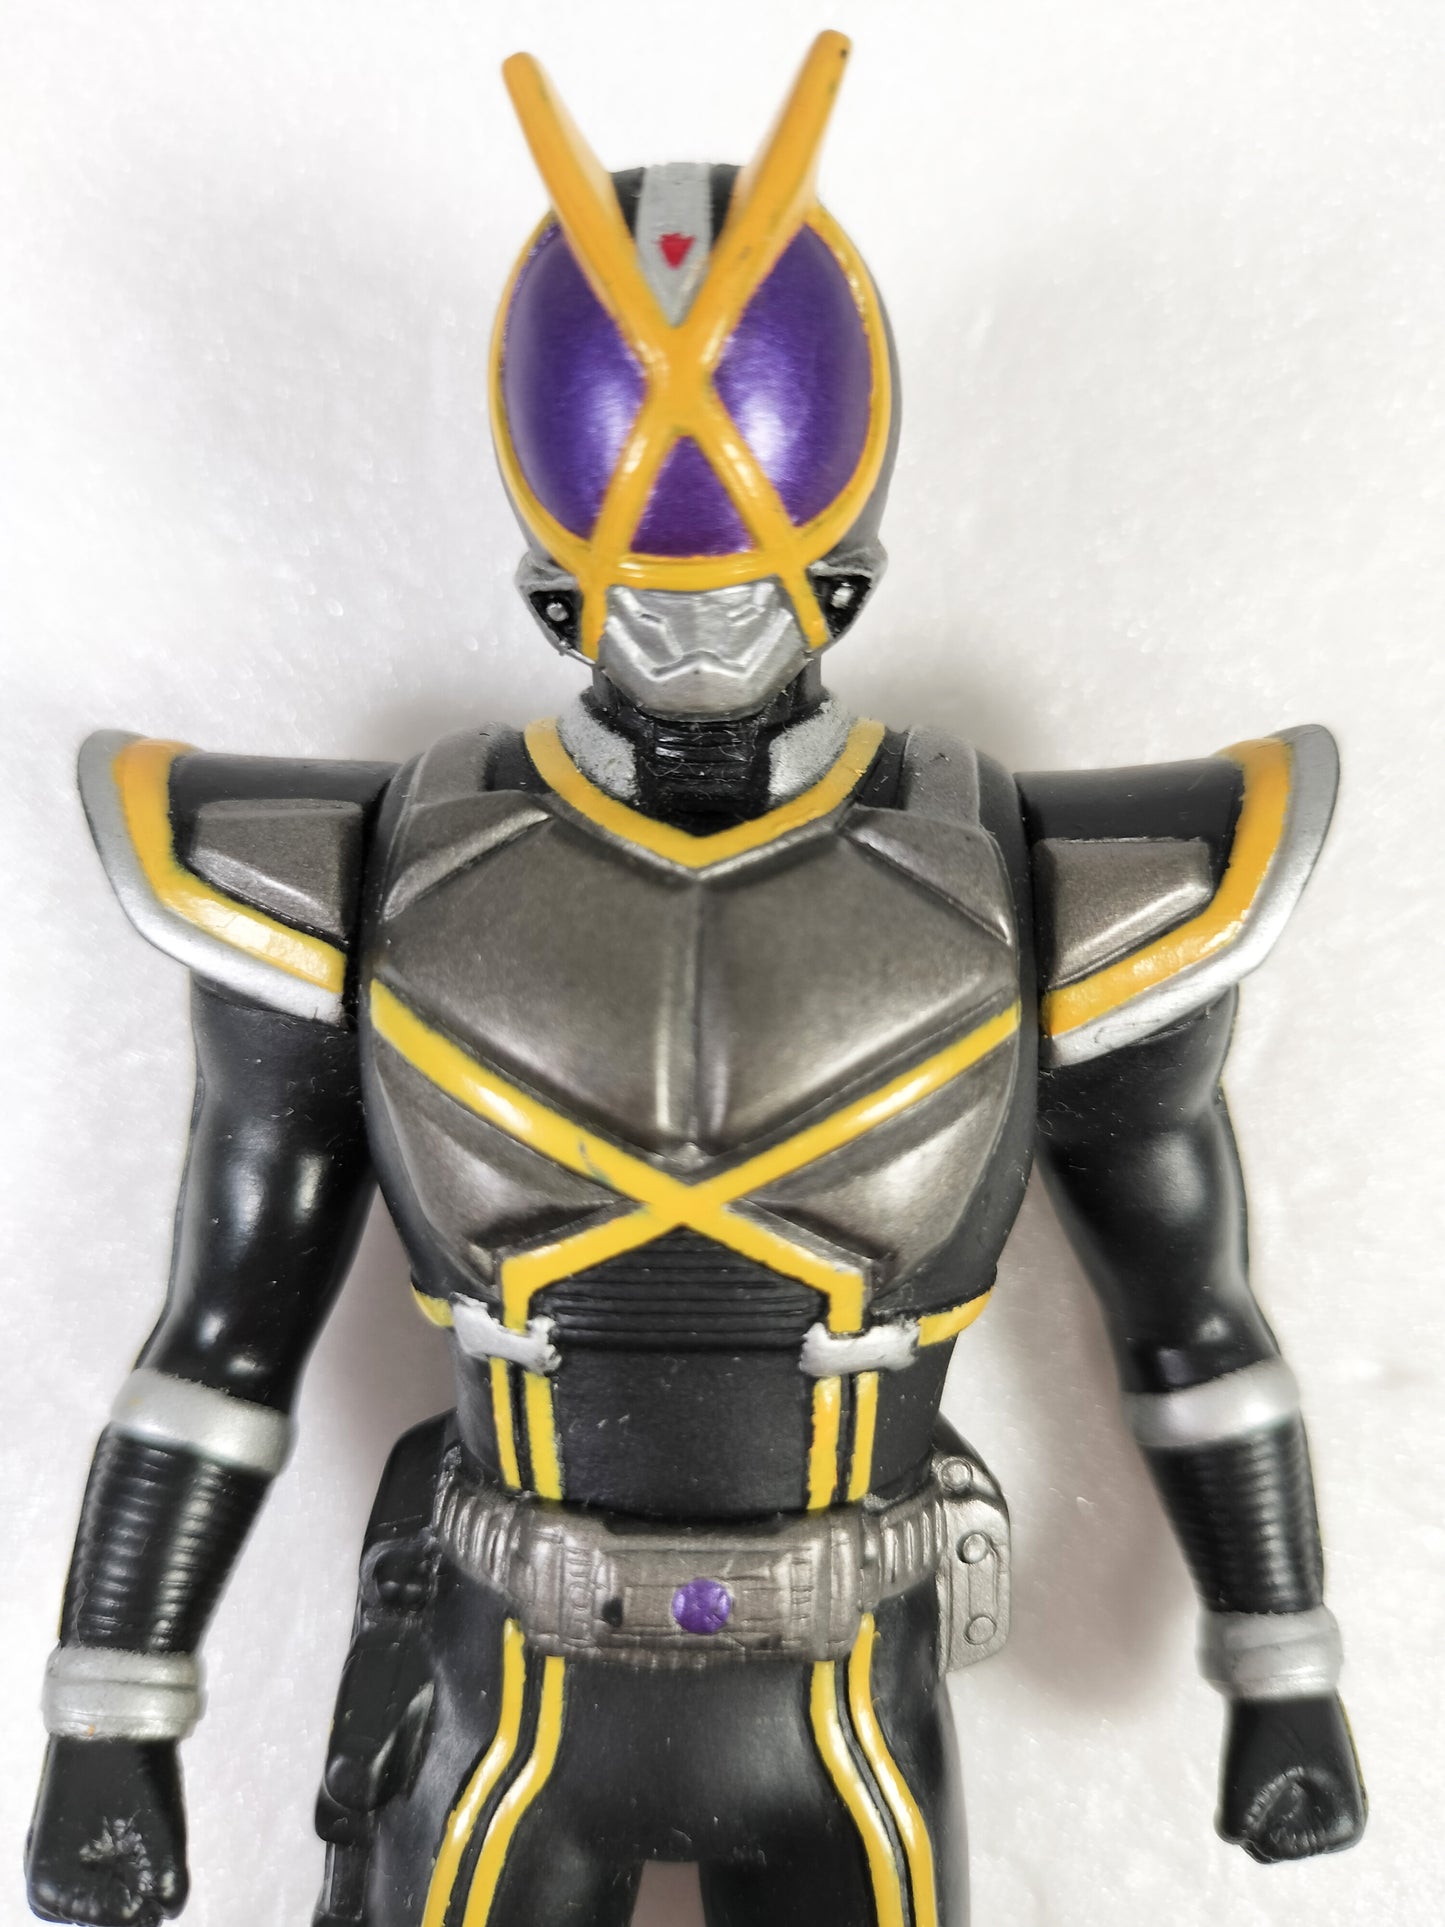 Kamen Rider Kaiza Mask Rider Made in China Height about 13.5cm Manufactured in 2003 Sofvi Figure retro vintage major scratches and dirt